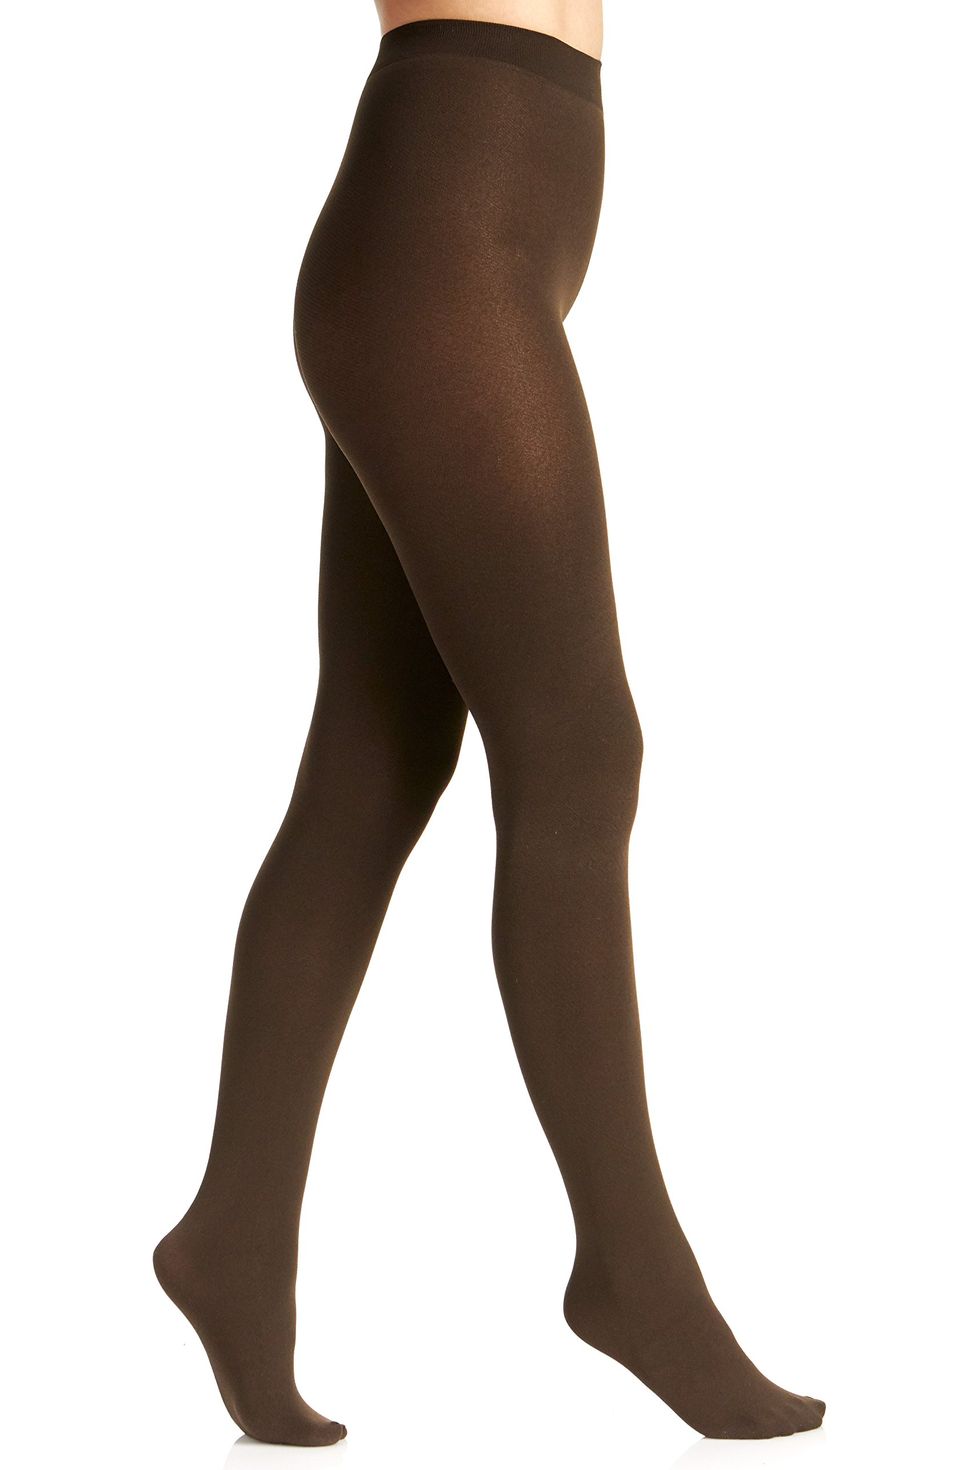 CALZITALY Wool Tights, Wool Pantyhose, Winter Tights, Thermal